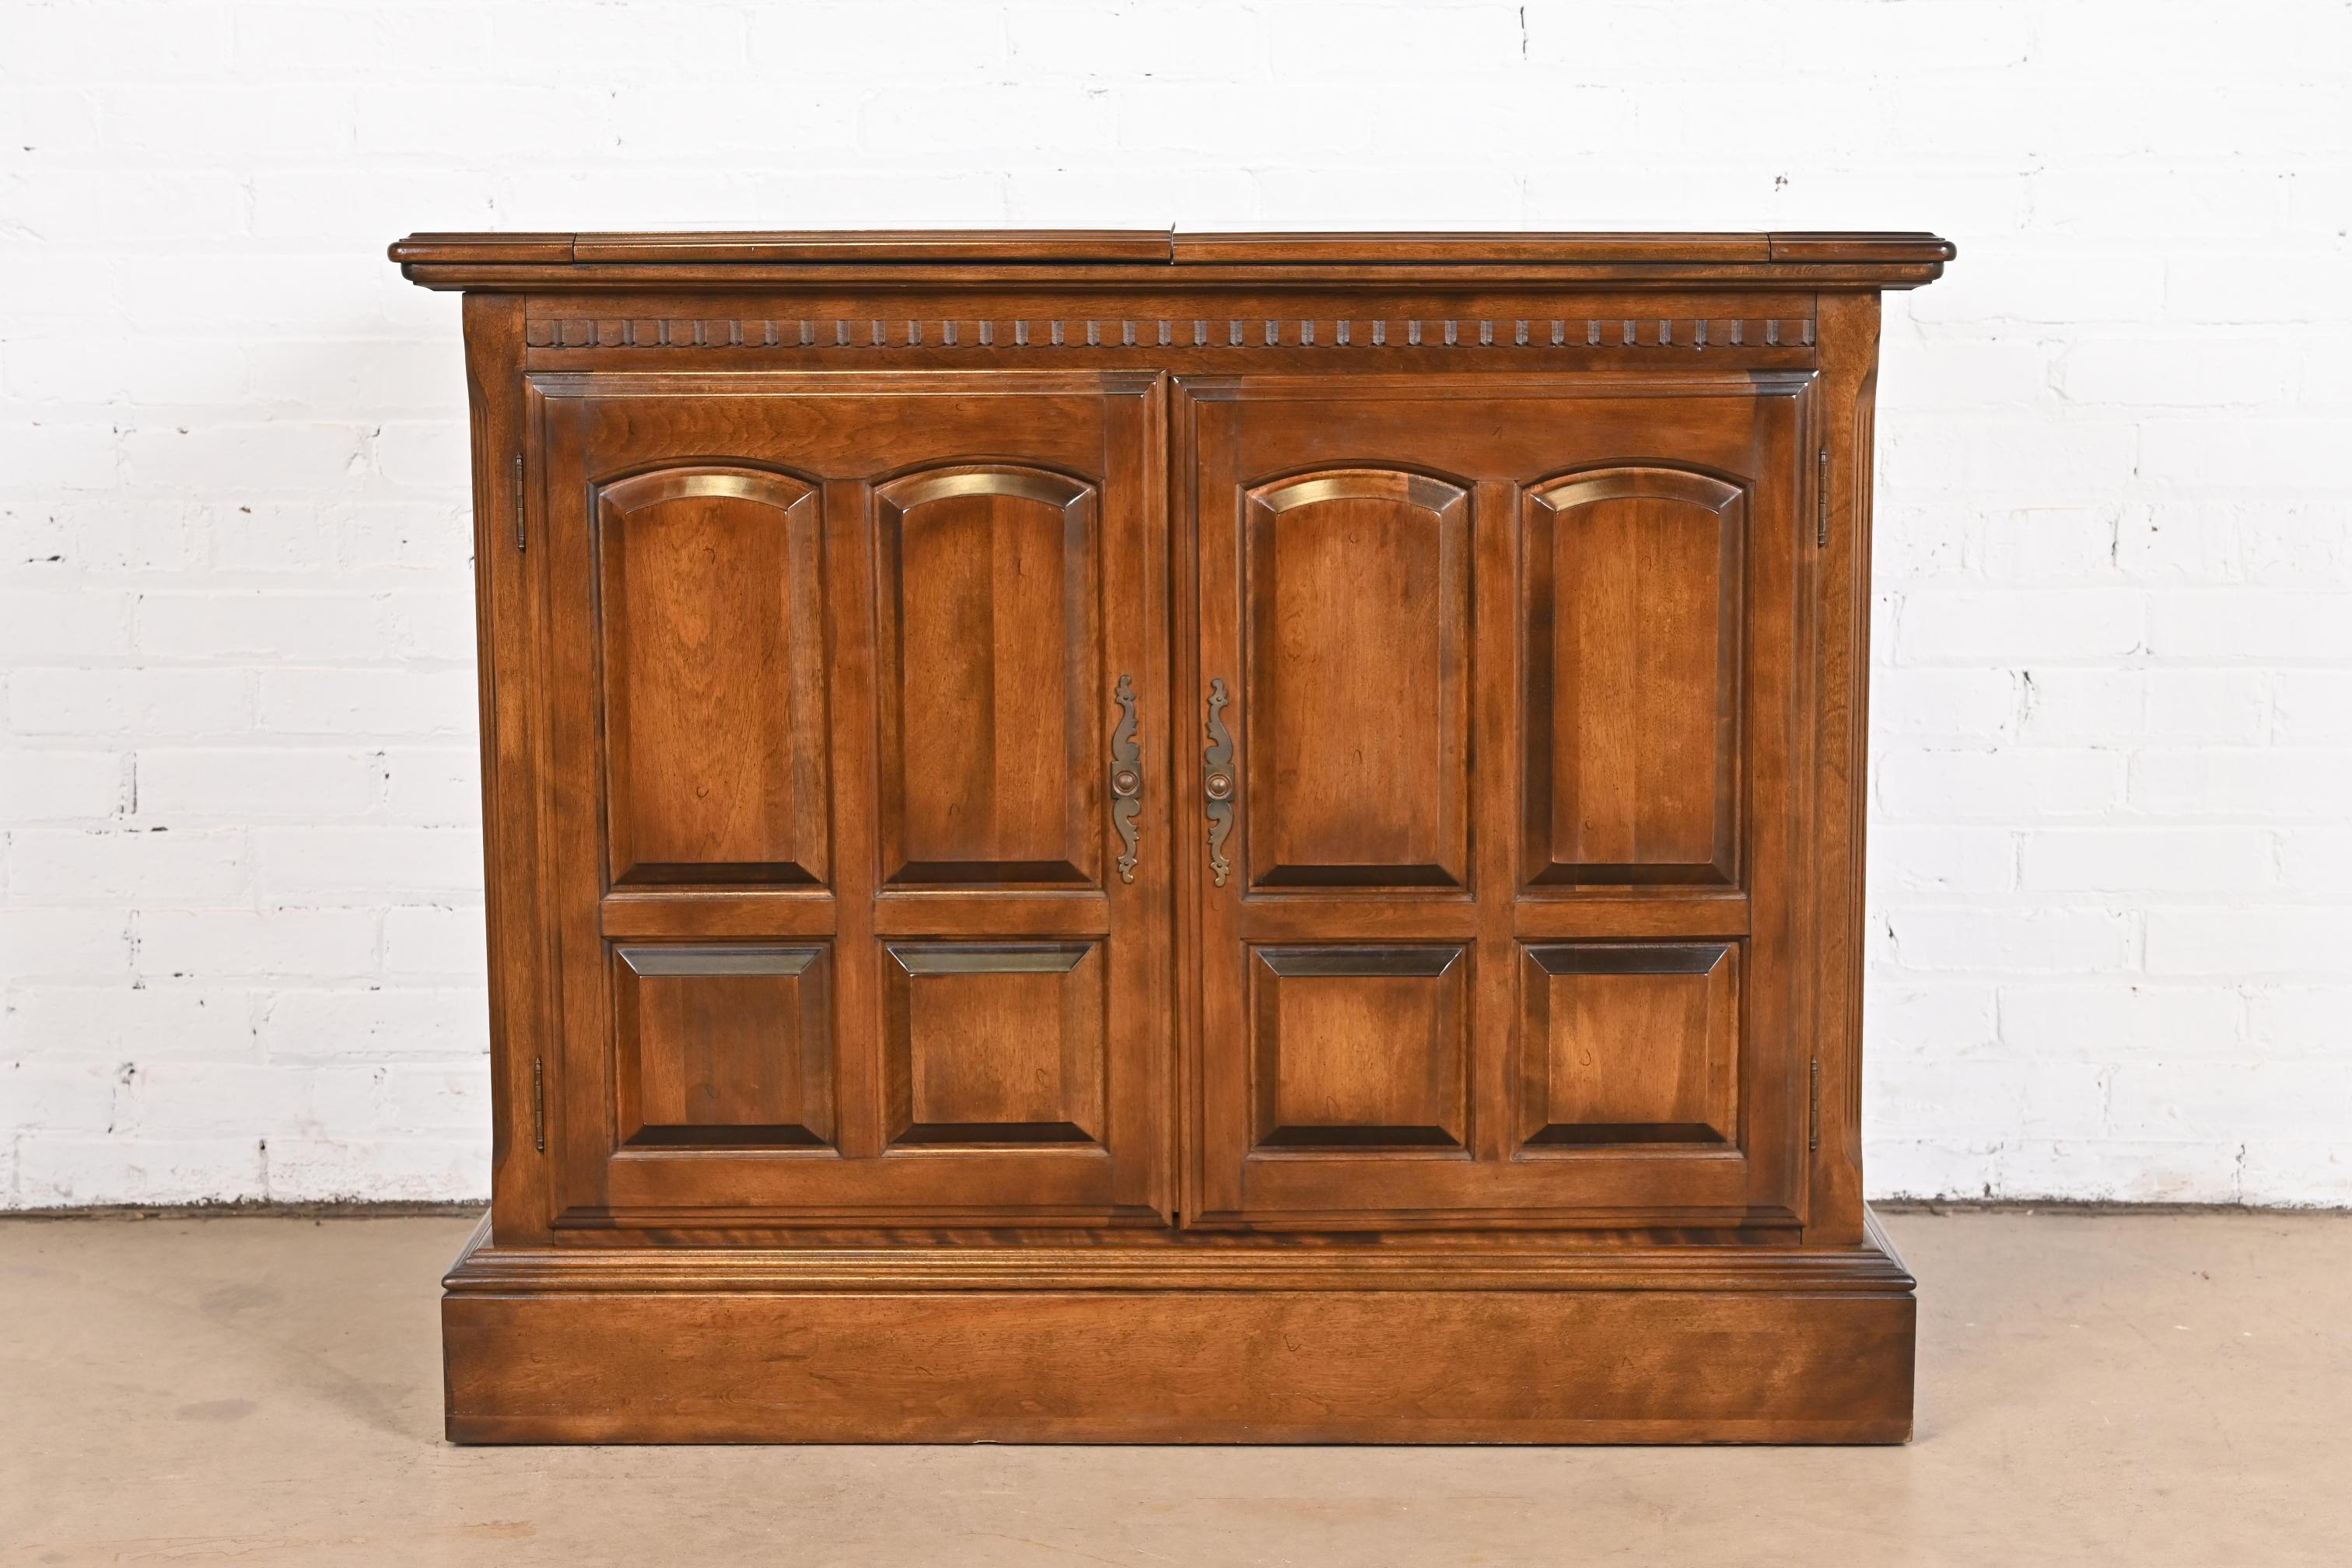 A beautiful Regency or Georgian style flip top rolling buffet server or bar cabinet

USA, Circa 1970s

Carved maple, with original brass hardware.

Measures: 41.5